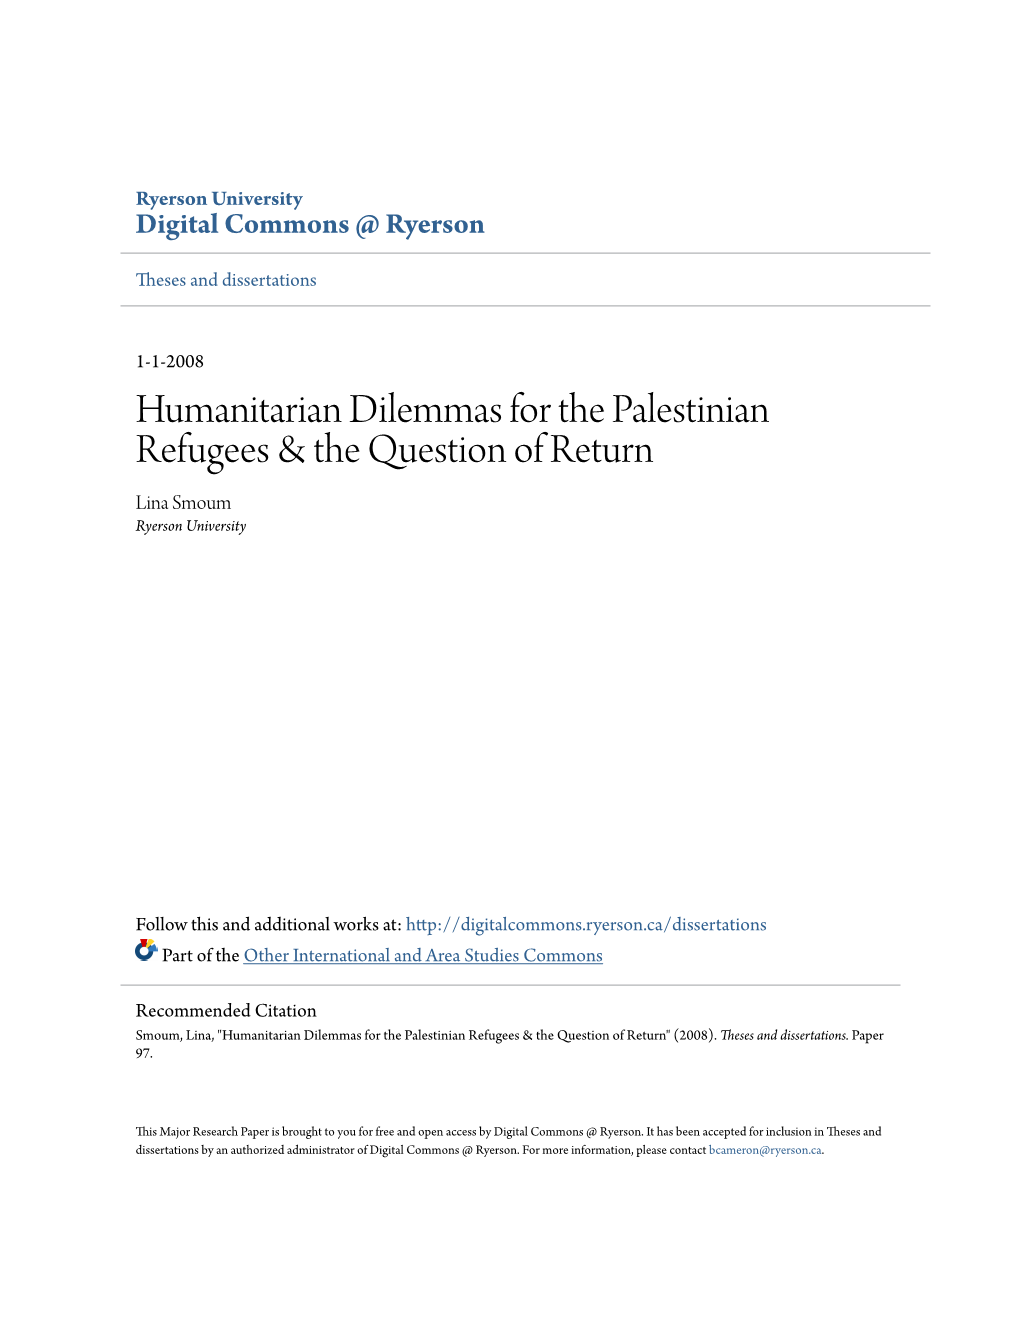 Humanitarian Dilemmas for the Palestinian Refugees & The